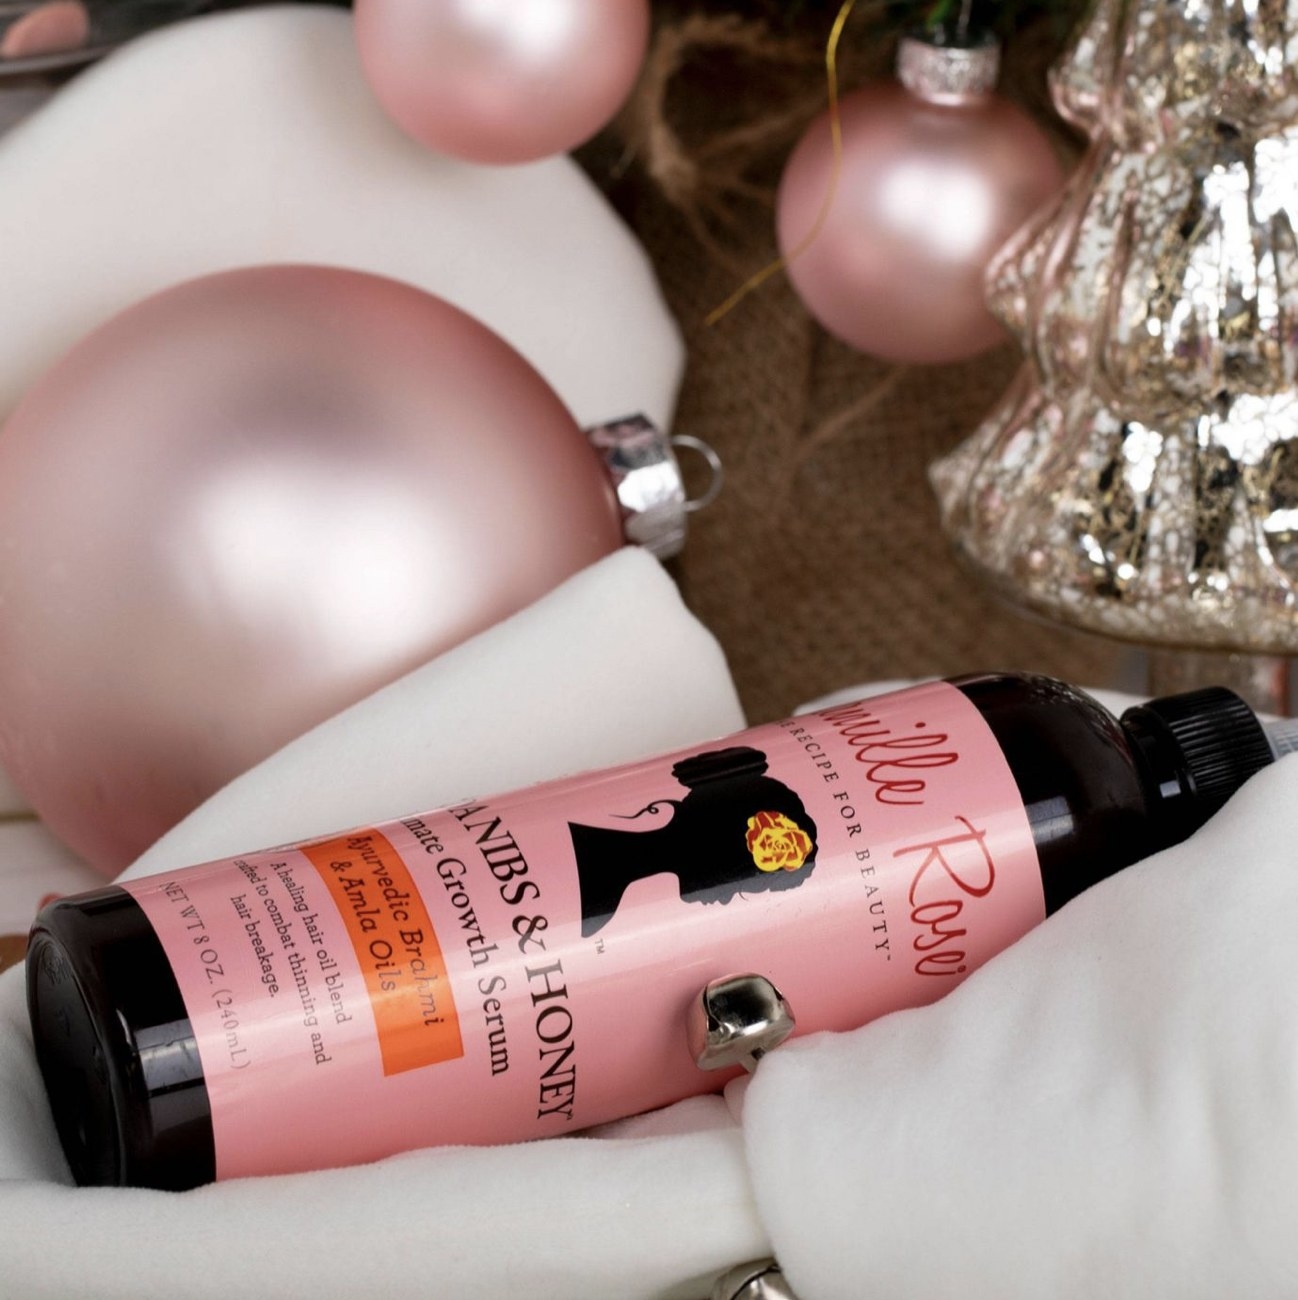 A bottle of hair serum with pink Christmas ornaments.